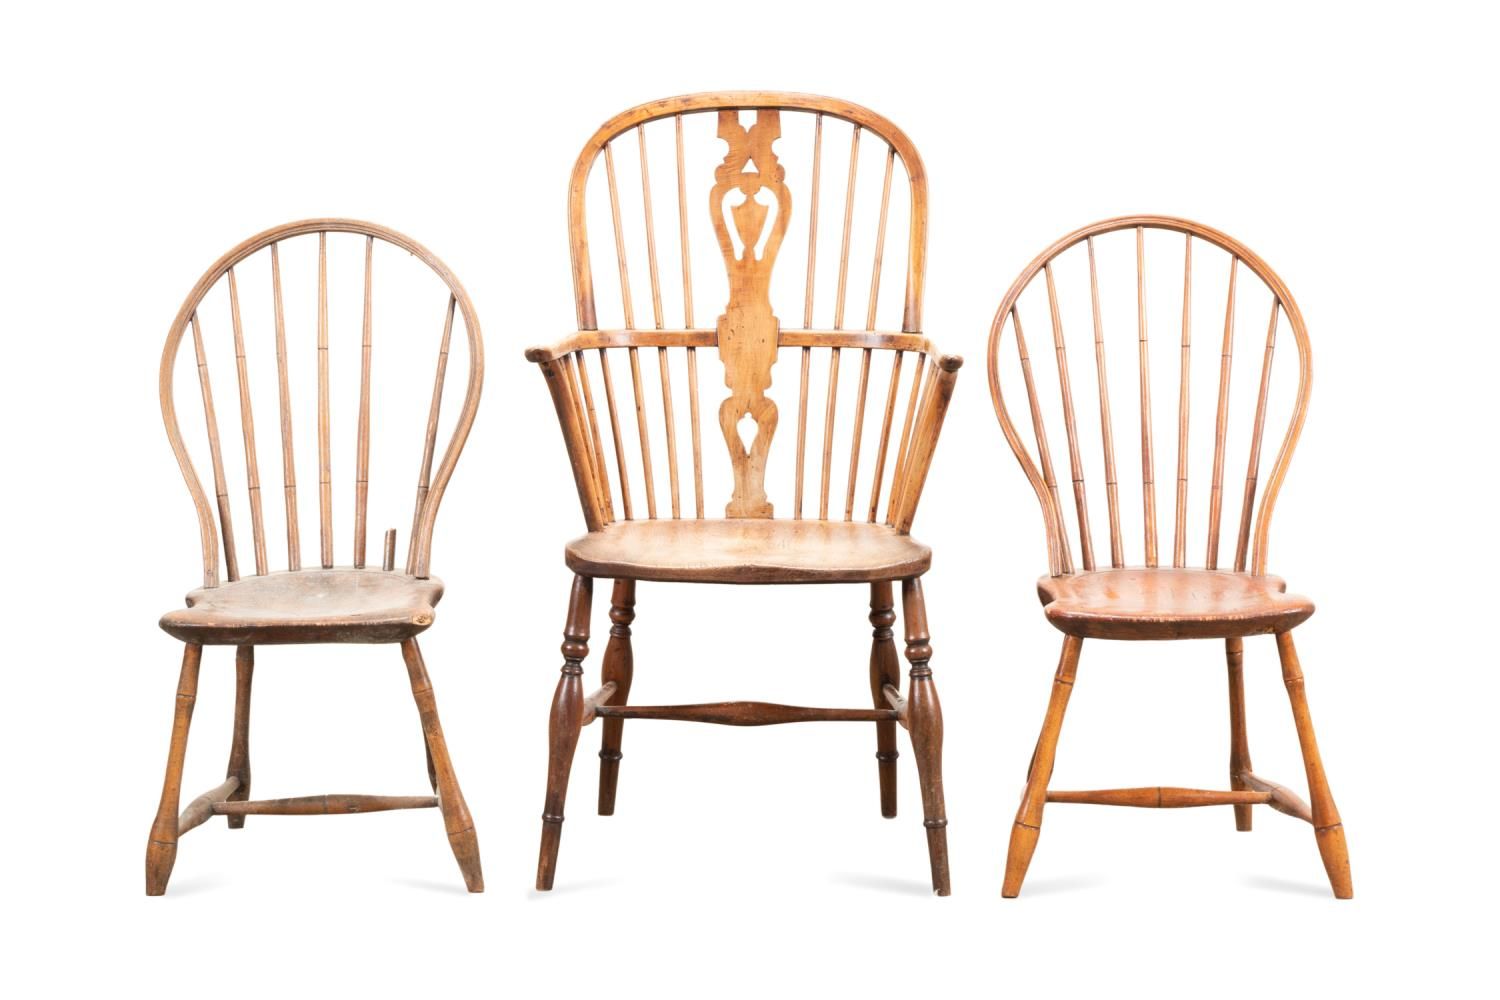 THREE ASSEMBLED WINDSOR CHAIRS, 19TH